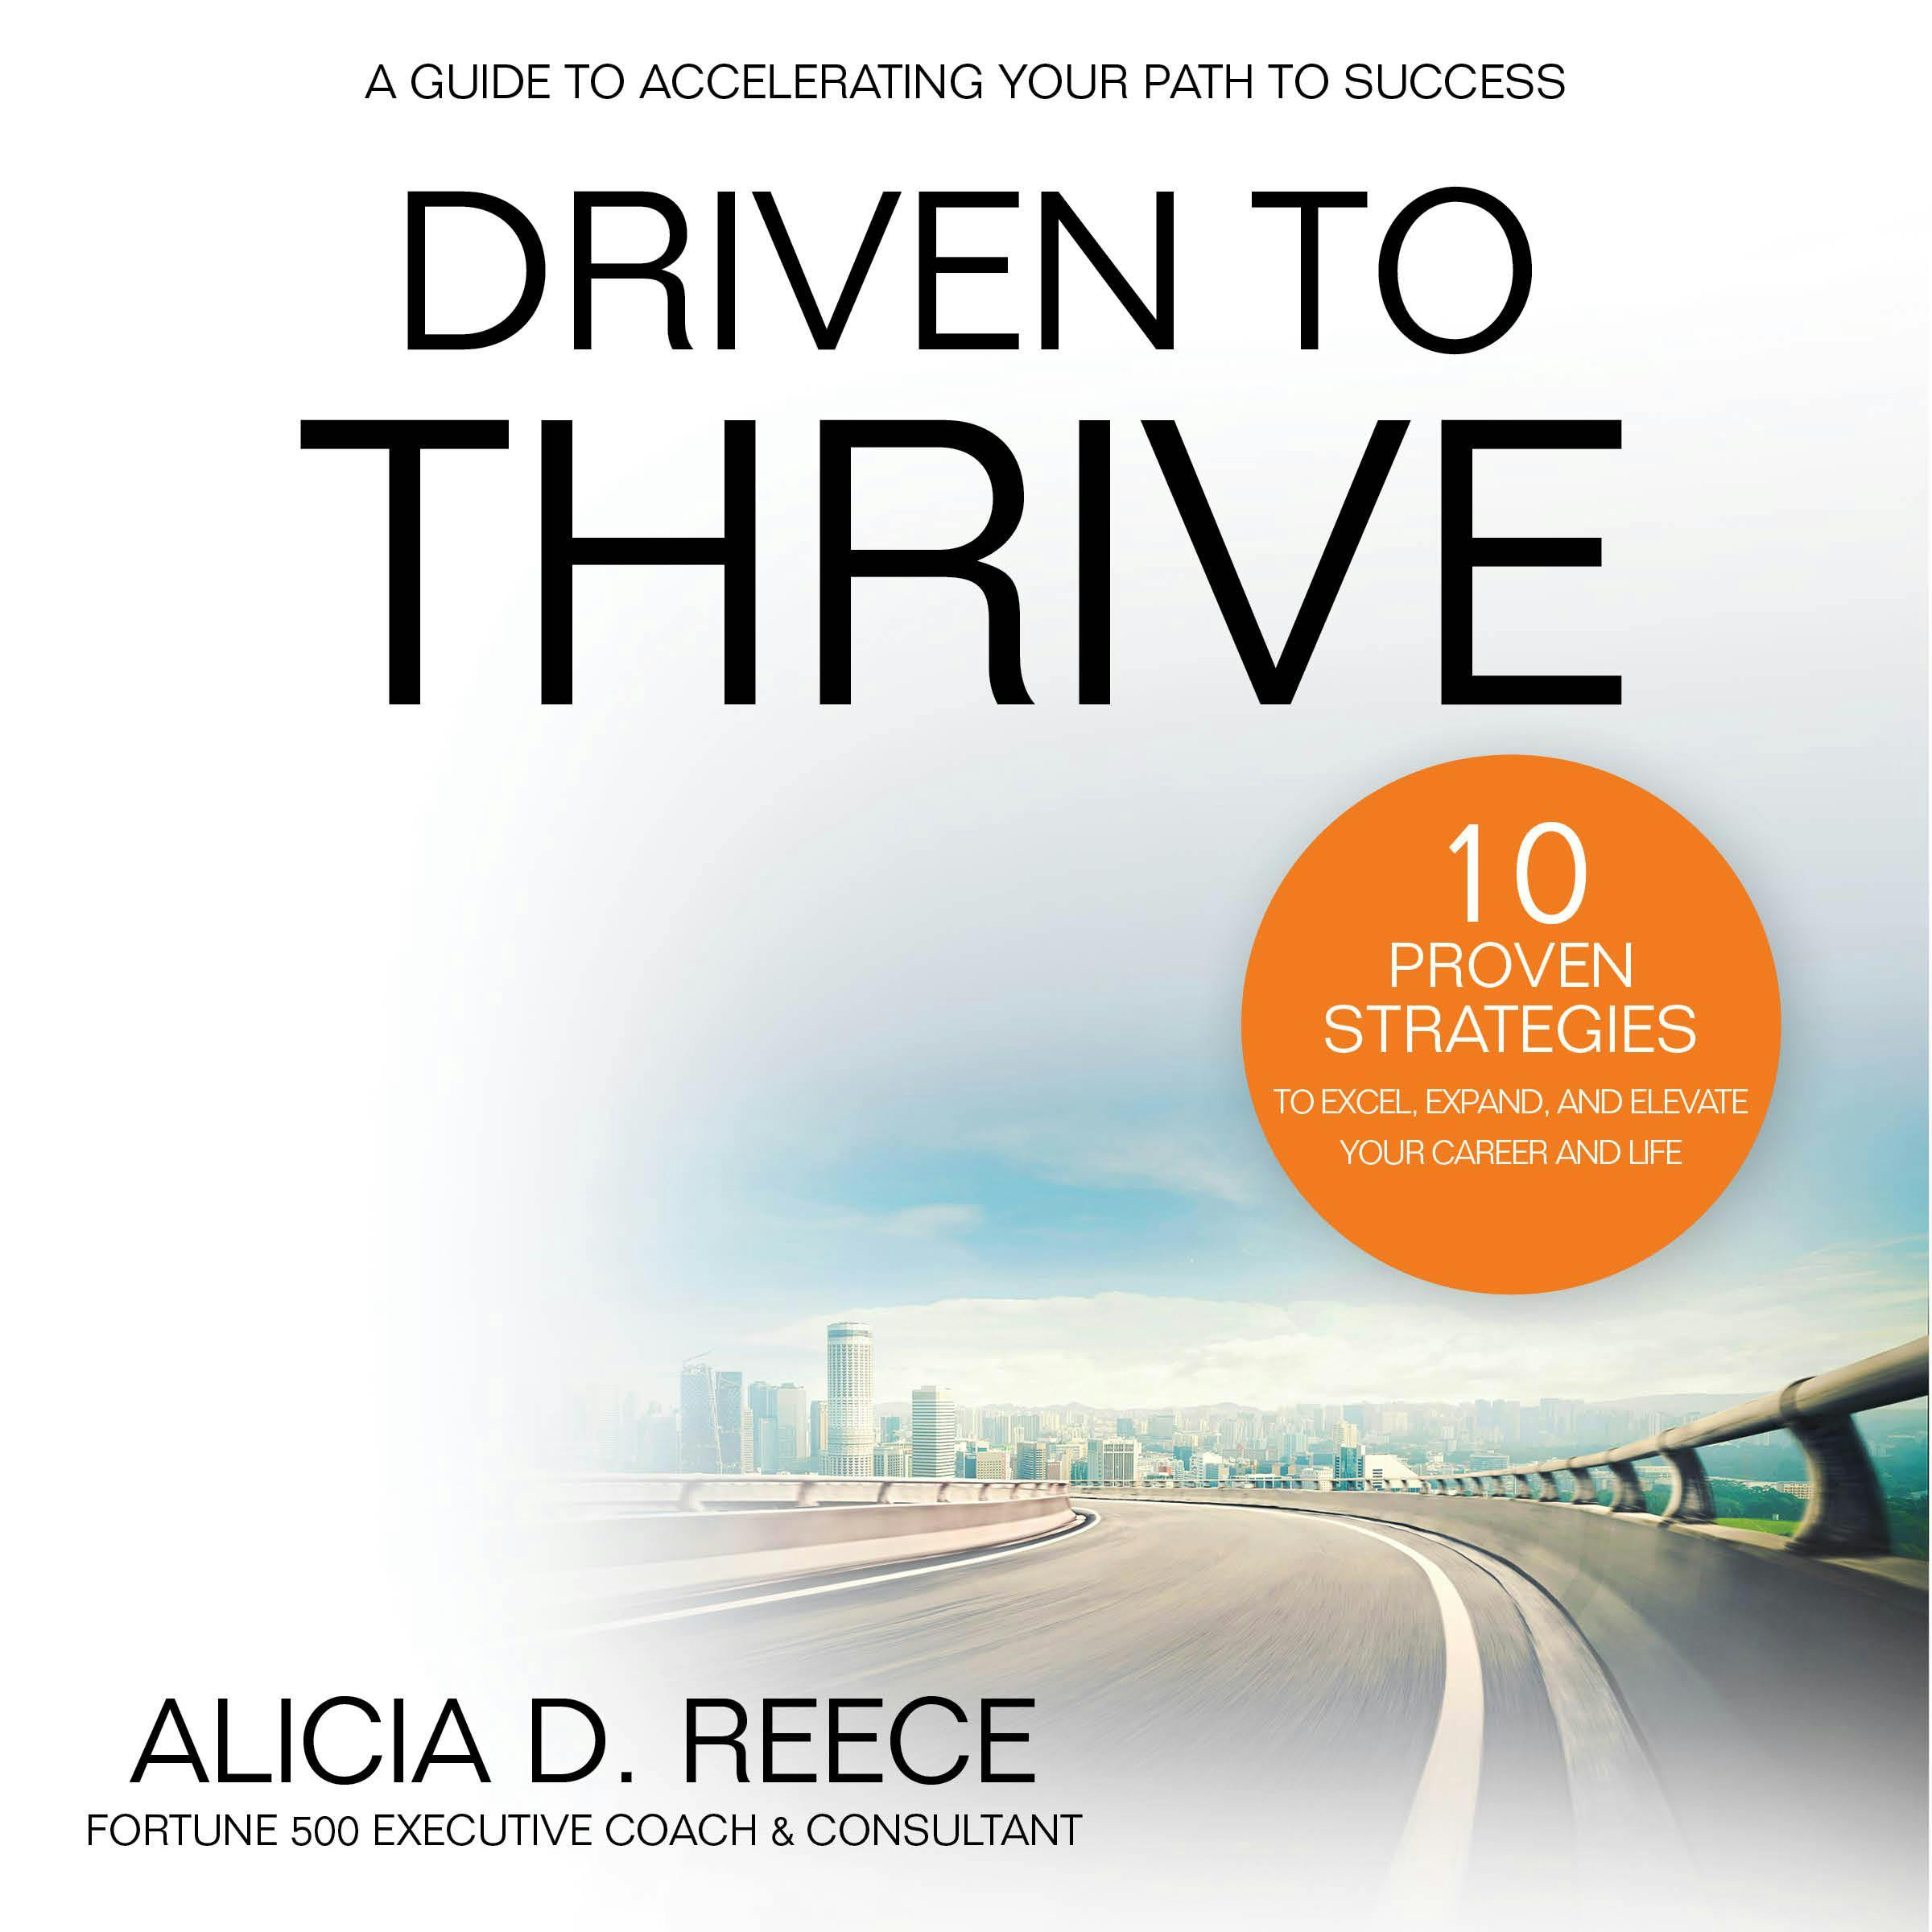 Driven to Thrive: 10 Proven Strategies to Excel, Expand, and Elevate Your Career and Life - Alicia D. Reece